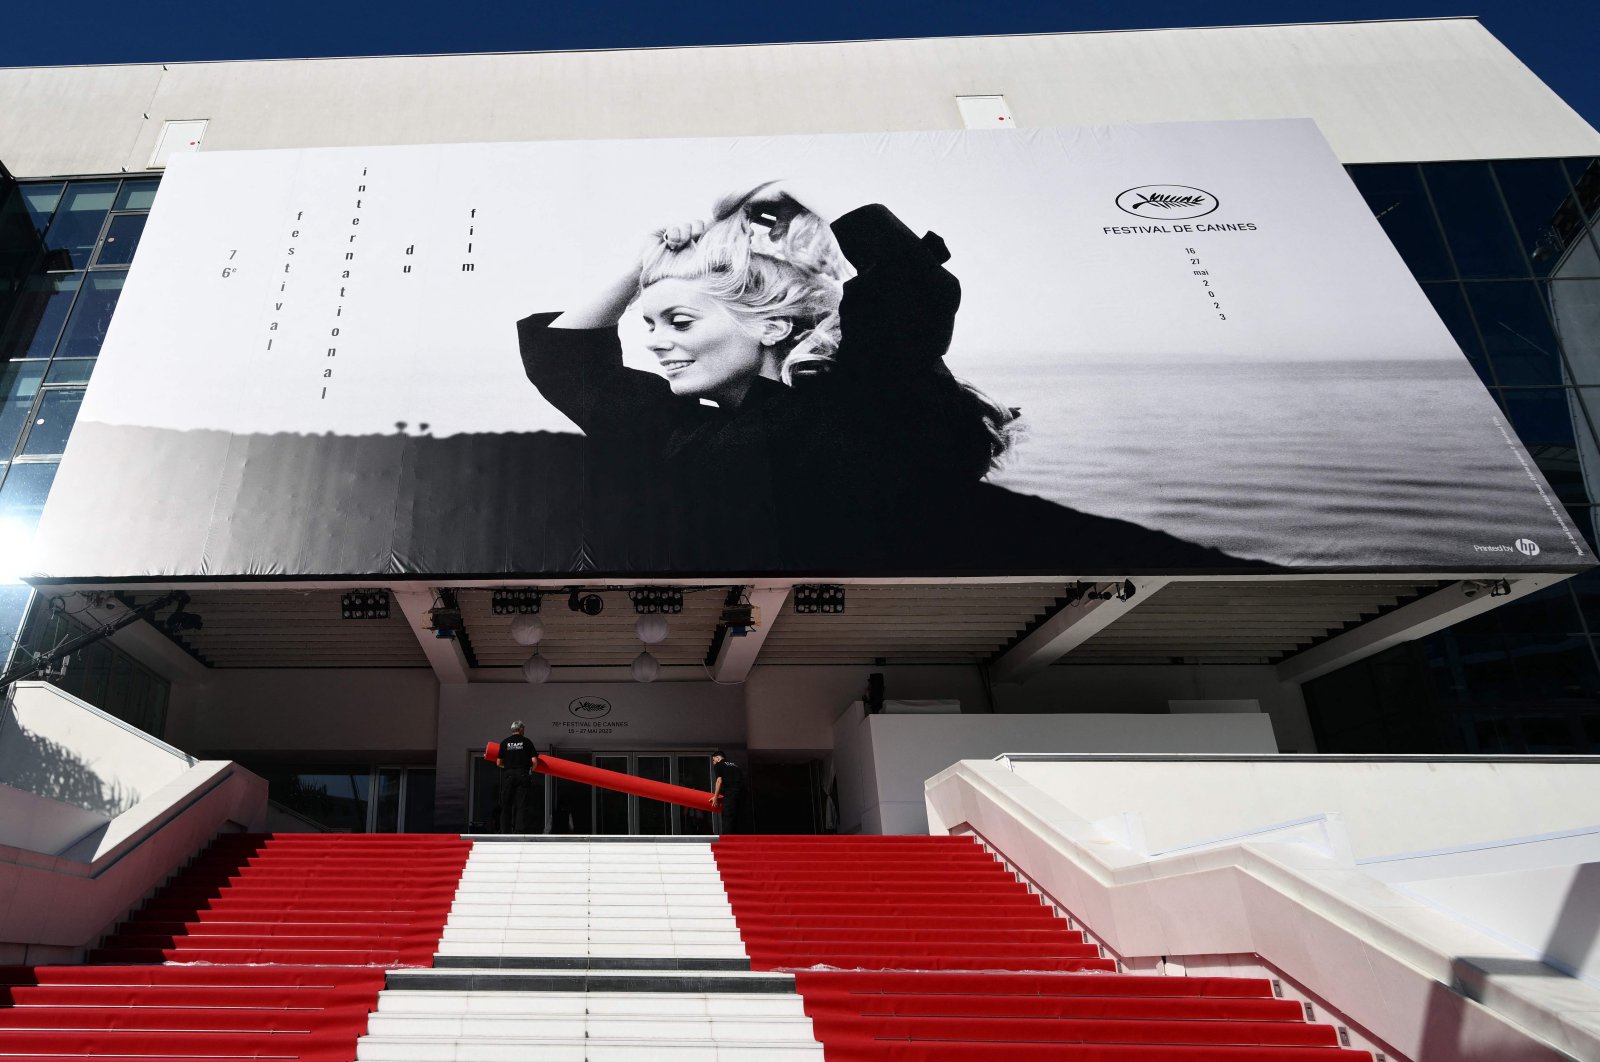 Workers prepare the red carpet ahead of the opening of the 76th Cannes Film Festival in Cannes, France, May 16, 2023. (AFP Photo)